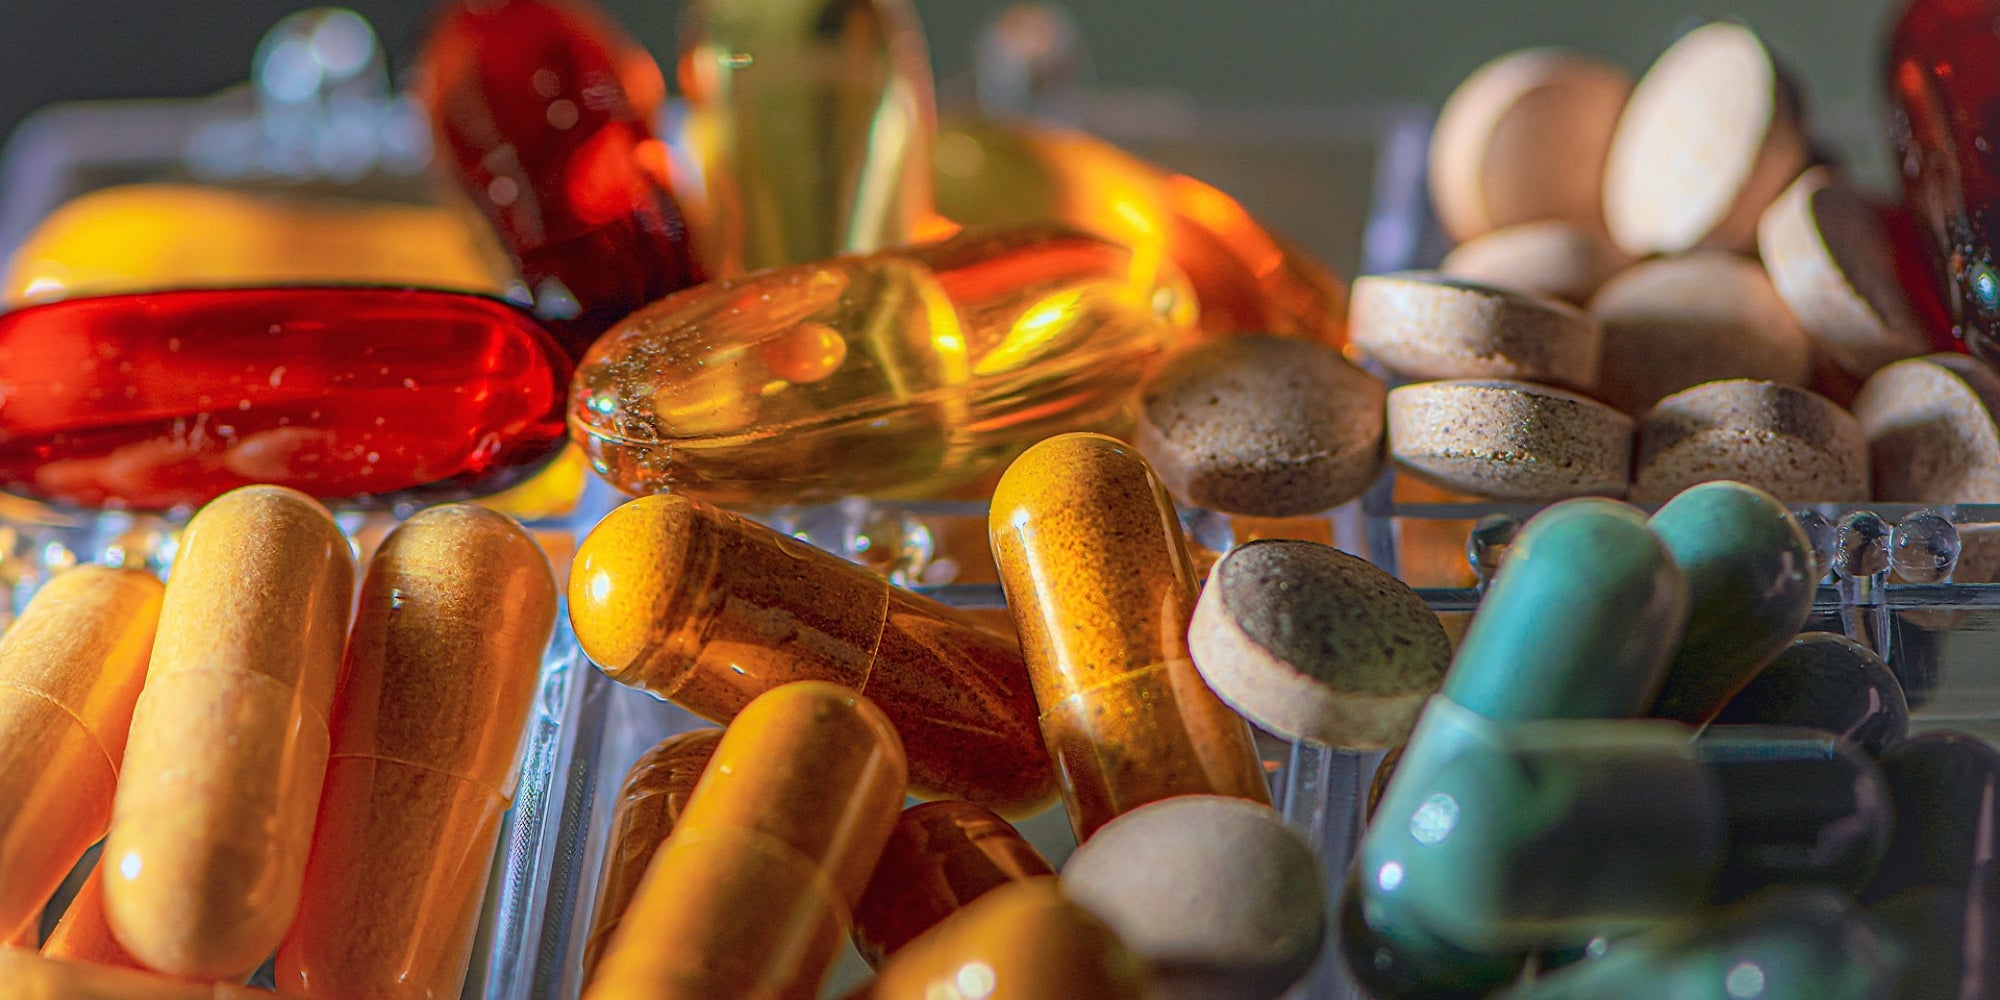 The Top 3 Supplements That Almost Everyone Could Benefit From